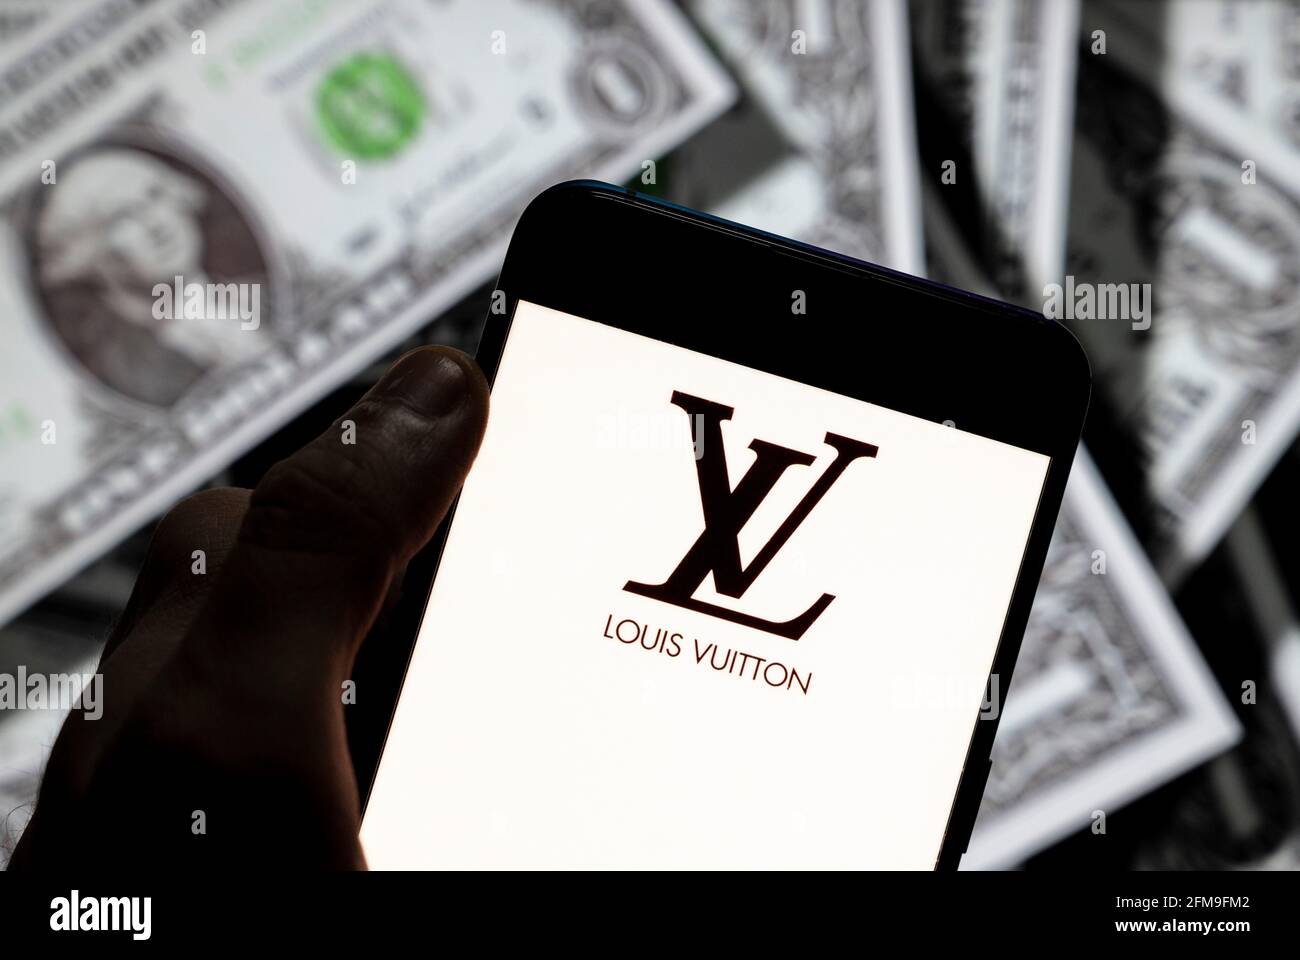 Louis Vuitton High Resolution Stock and Images -